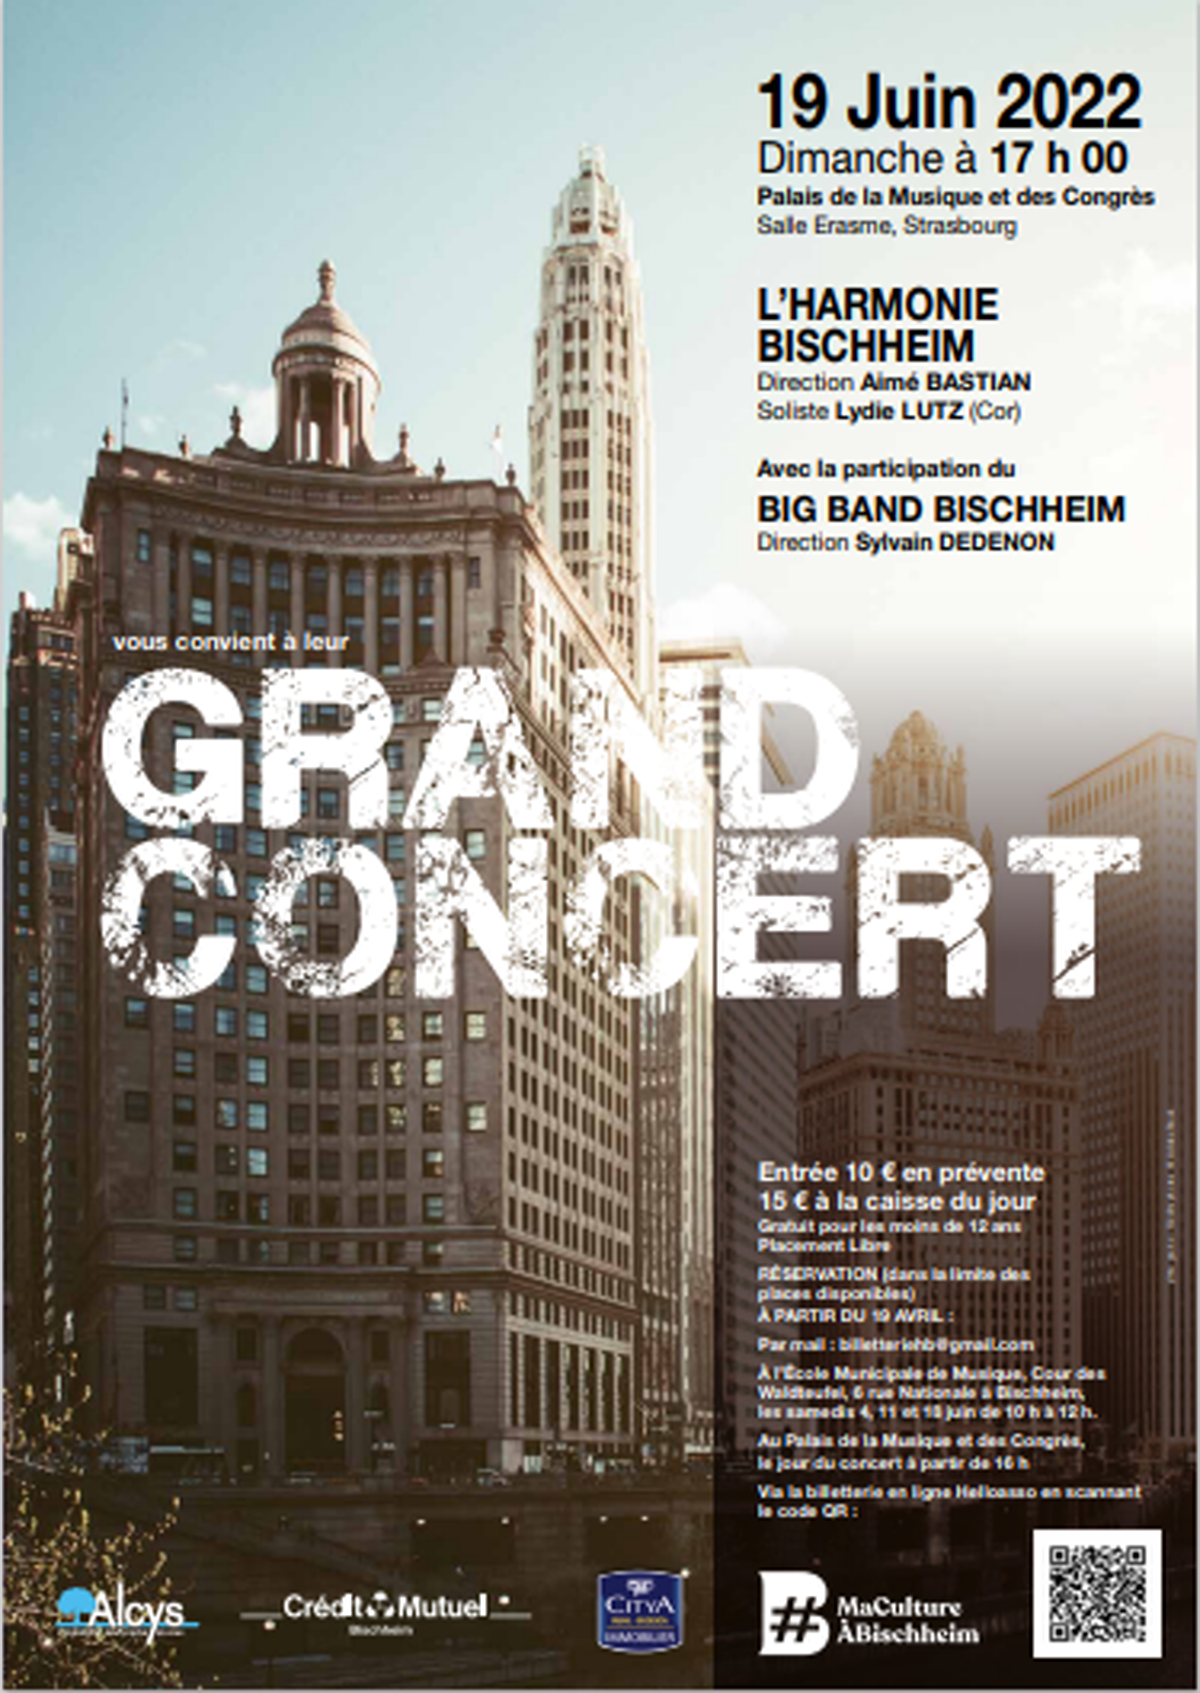 French Premiere of the 3rd Symphony “Urban Landscapes” L’Harmonie Bischheim conducted by Aimé Bastian, Strassbourg, 19th June 2022